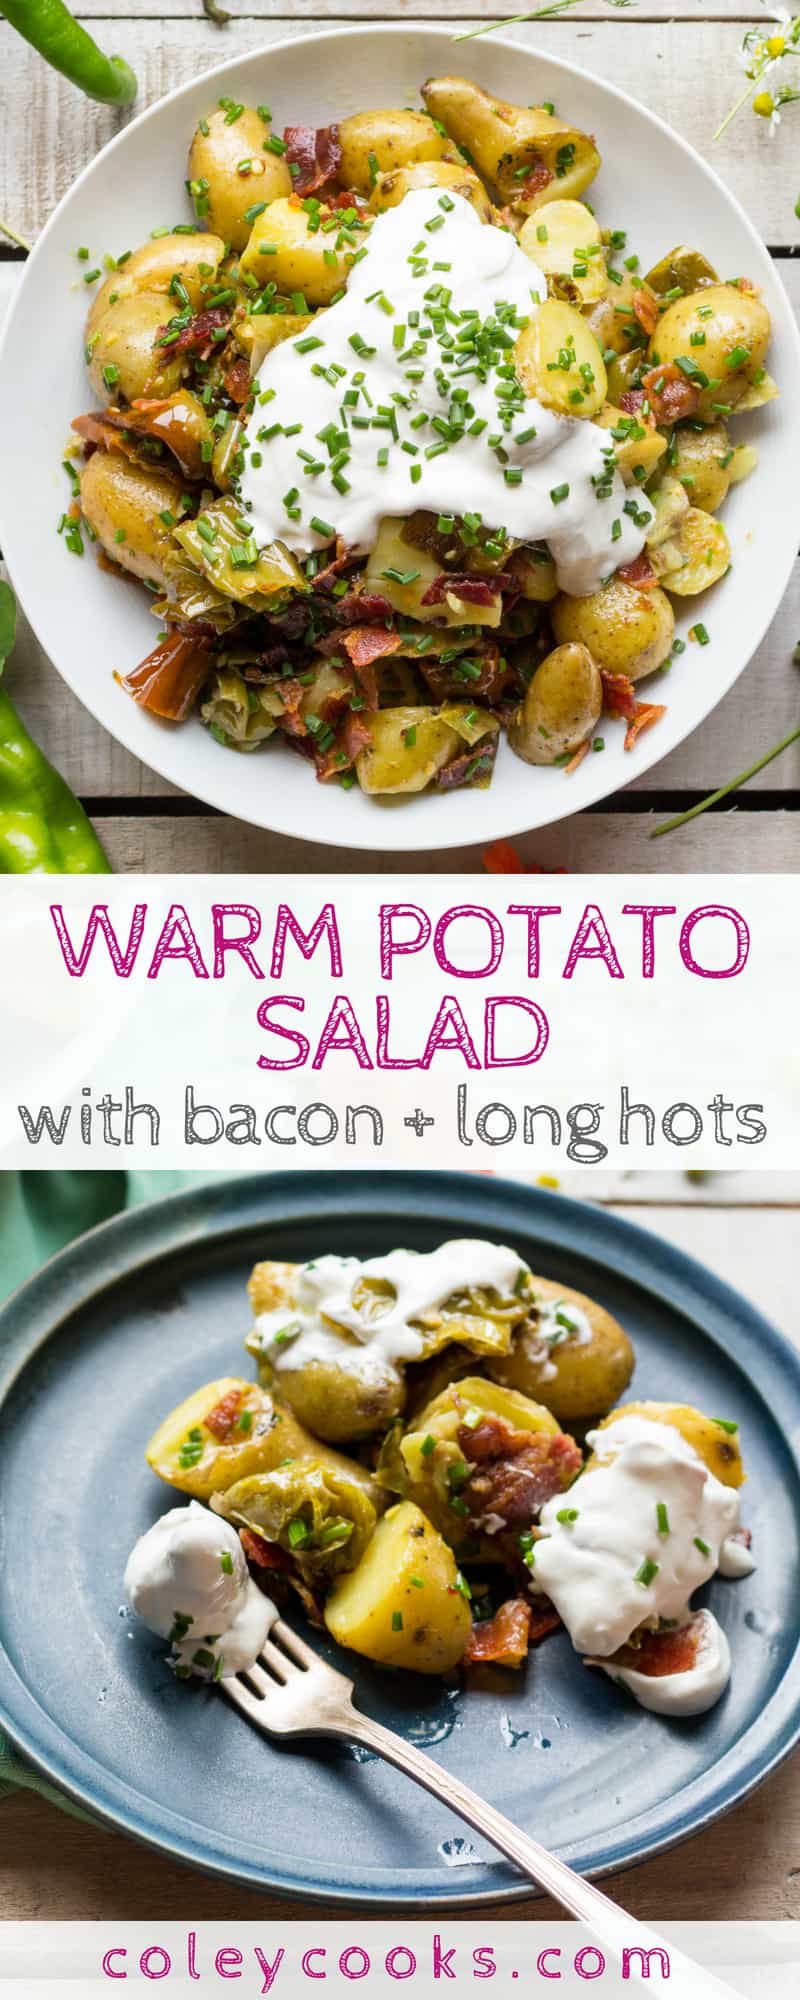 WARM POTATO SALAD with BACON + LONG HOTS | My favorite potato salad recipe has no mayonnaise and tons of flavor from crispy bacon, spicy long hots, sour cream and chives. #potatoes #salad #side #reicpe #summer | ColeyCooks.com